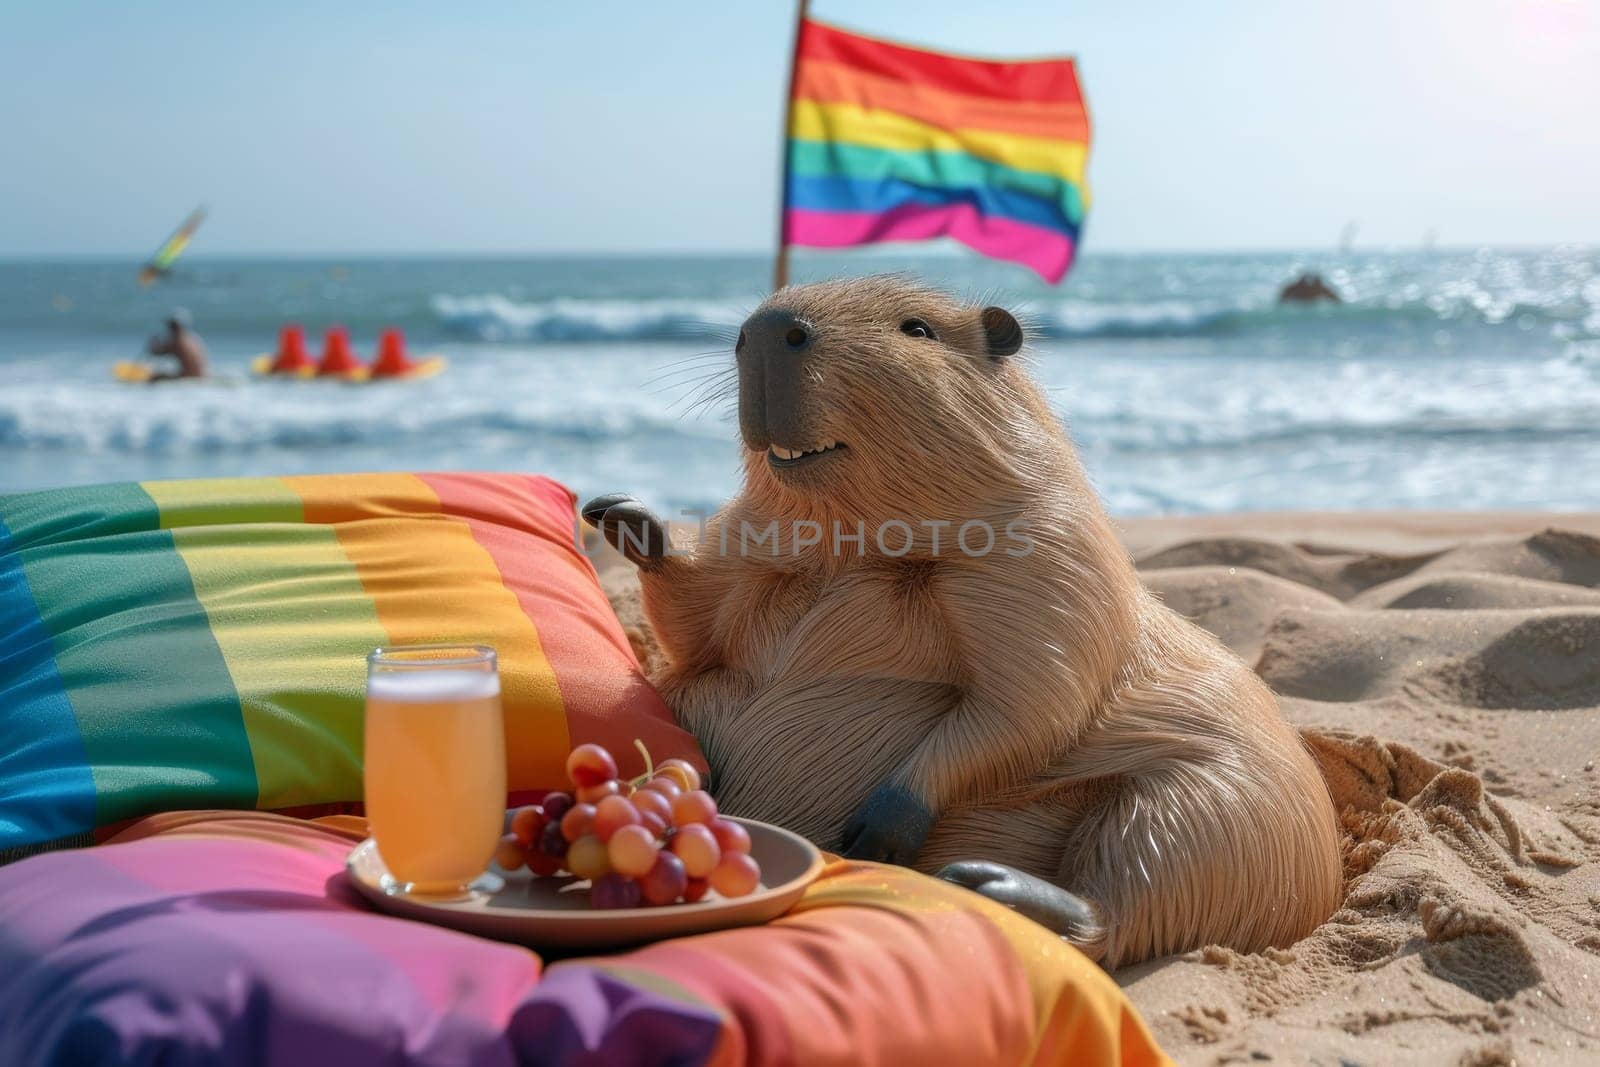 A monkey is sitting on a colorful beach blanket with a glass of orange juice and a plate of grapes